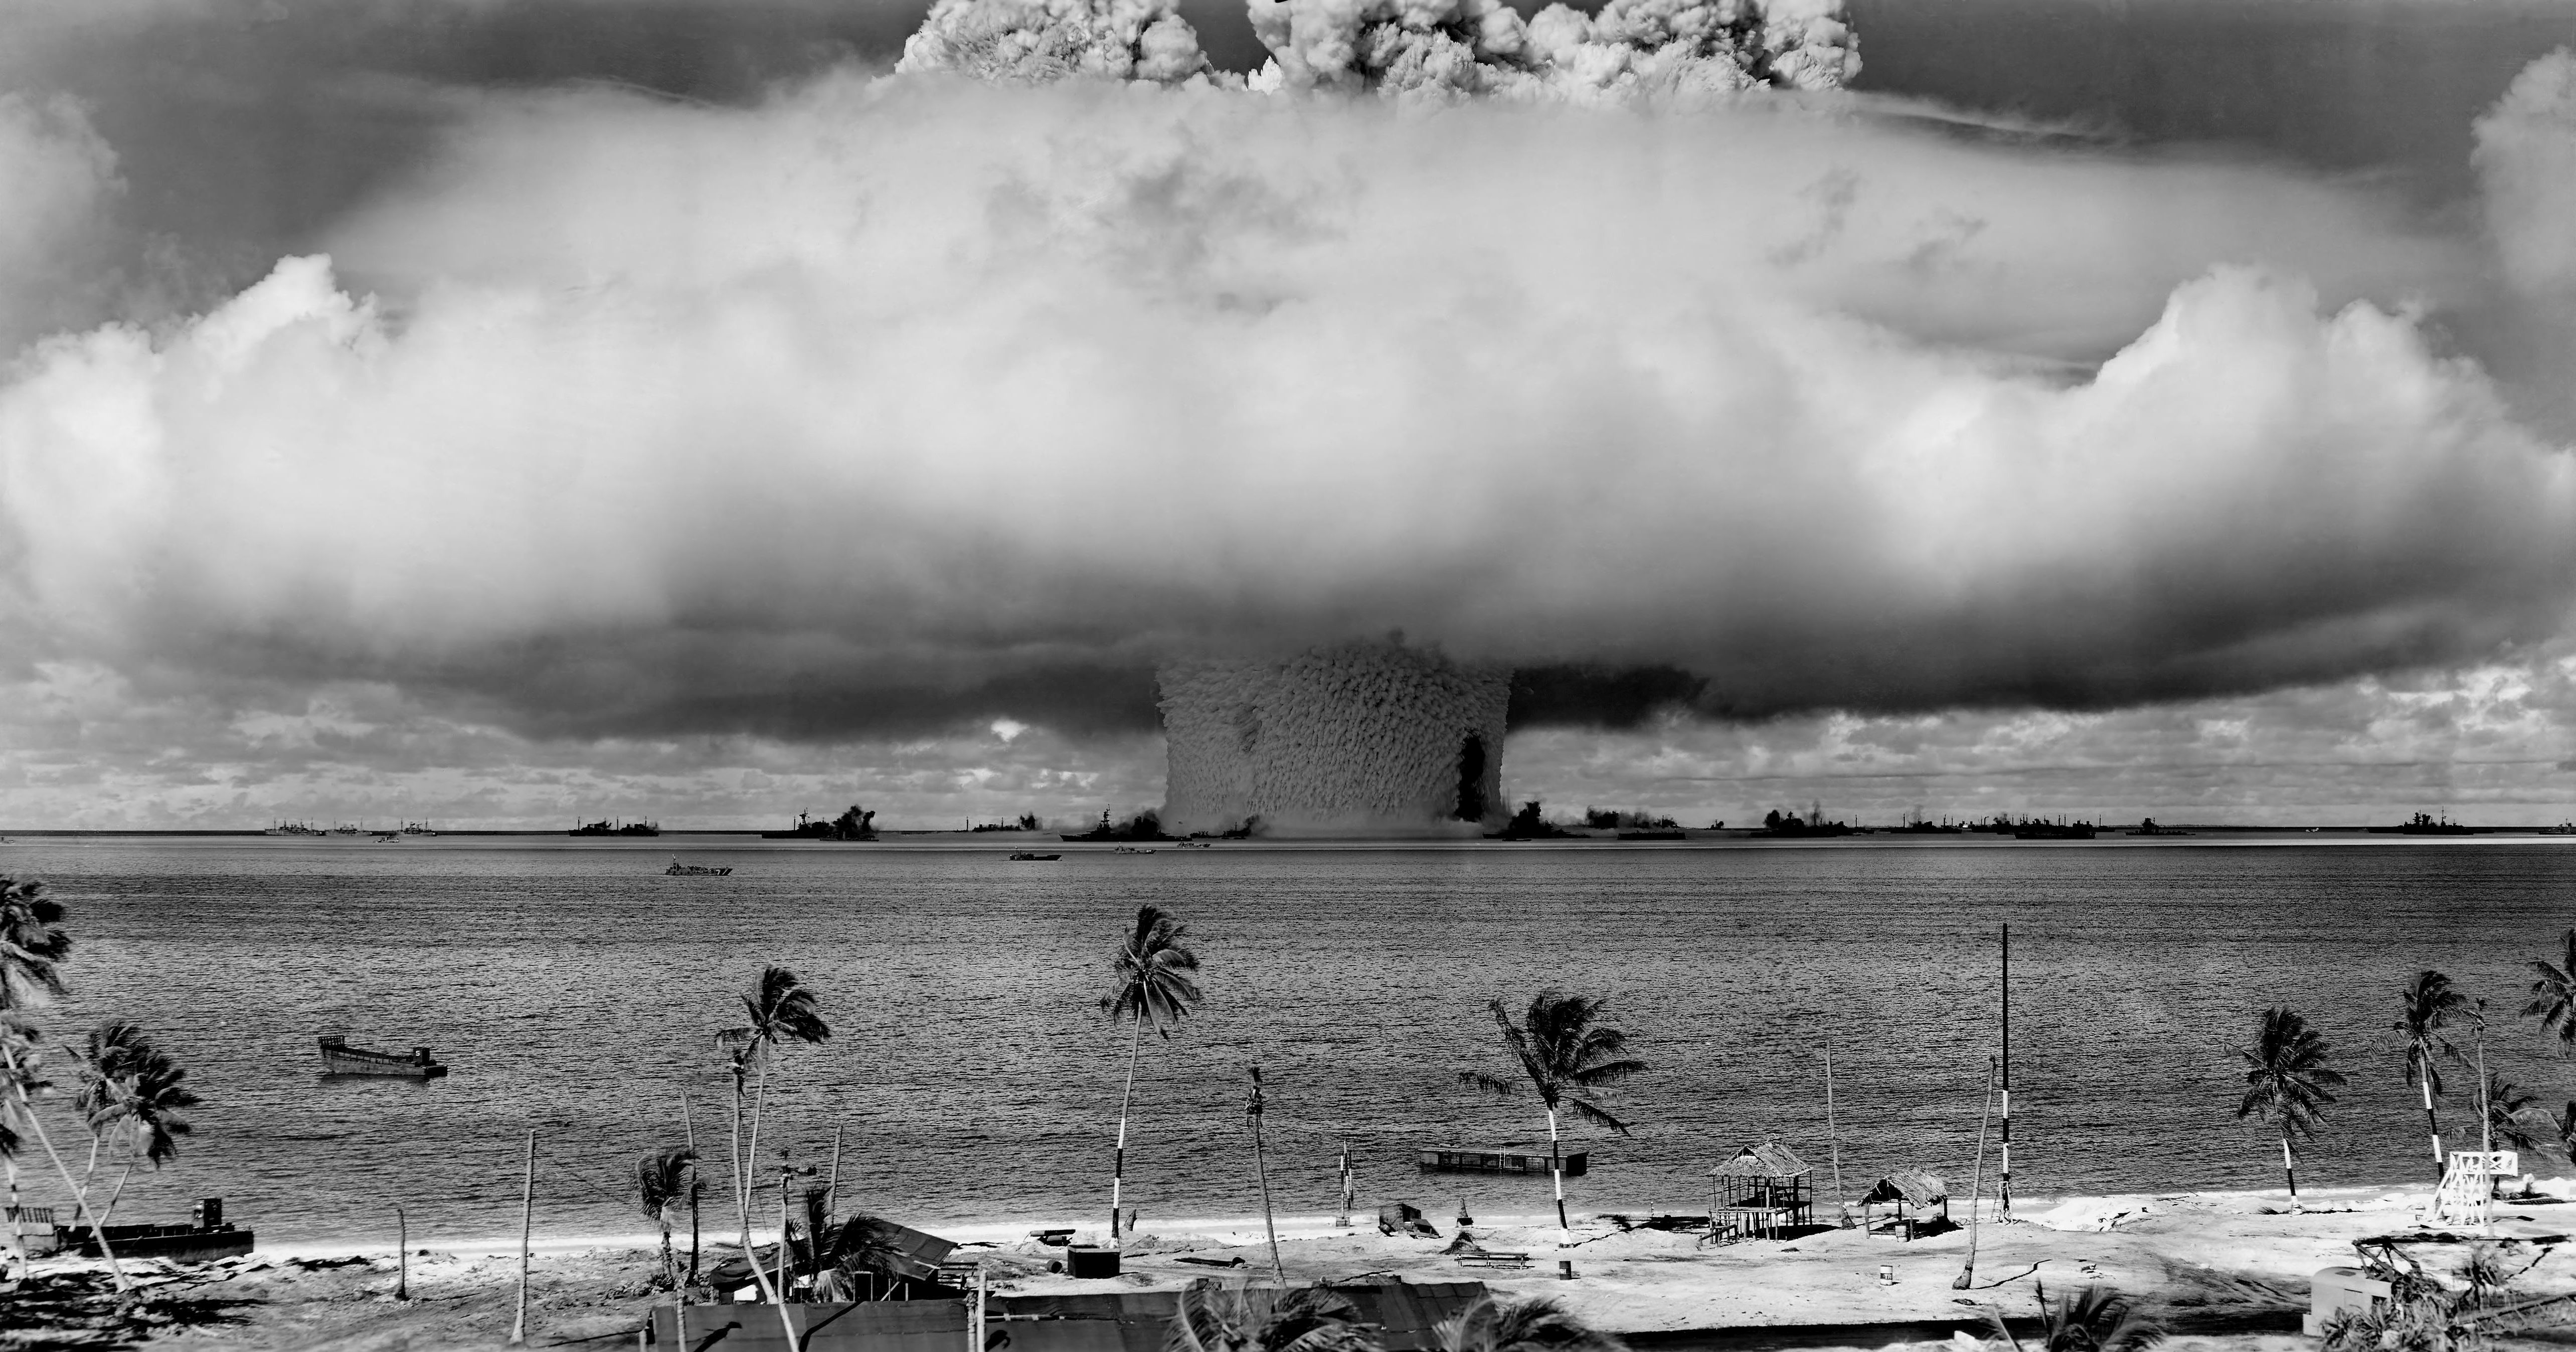 Underwater 23 kiloton nuclear bomb test, Bikini Atoll, 1946. Fun fact: the bikini swimsuit was named after Bikini Atoll because, like the weapon, the designer felt the swimsuit would also be “small and devastating.”